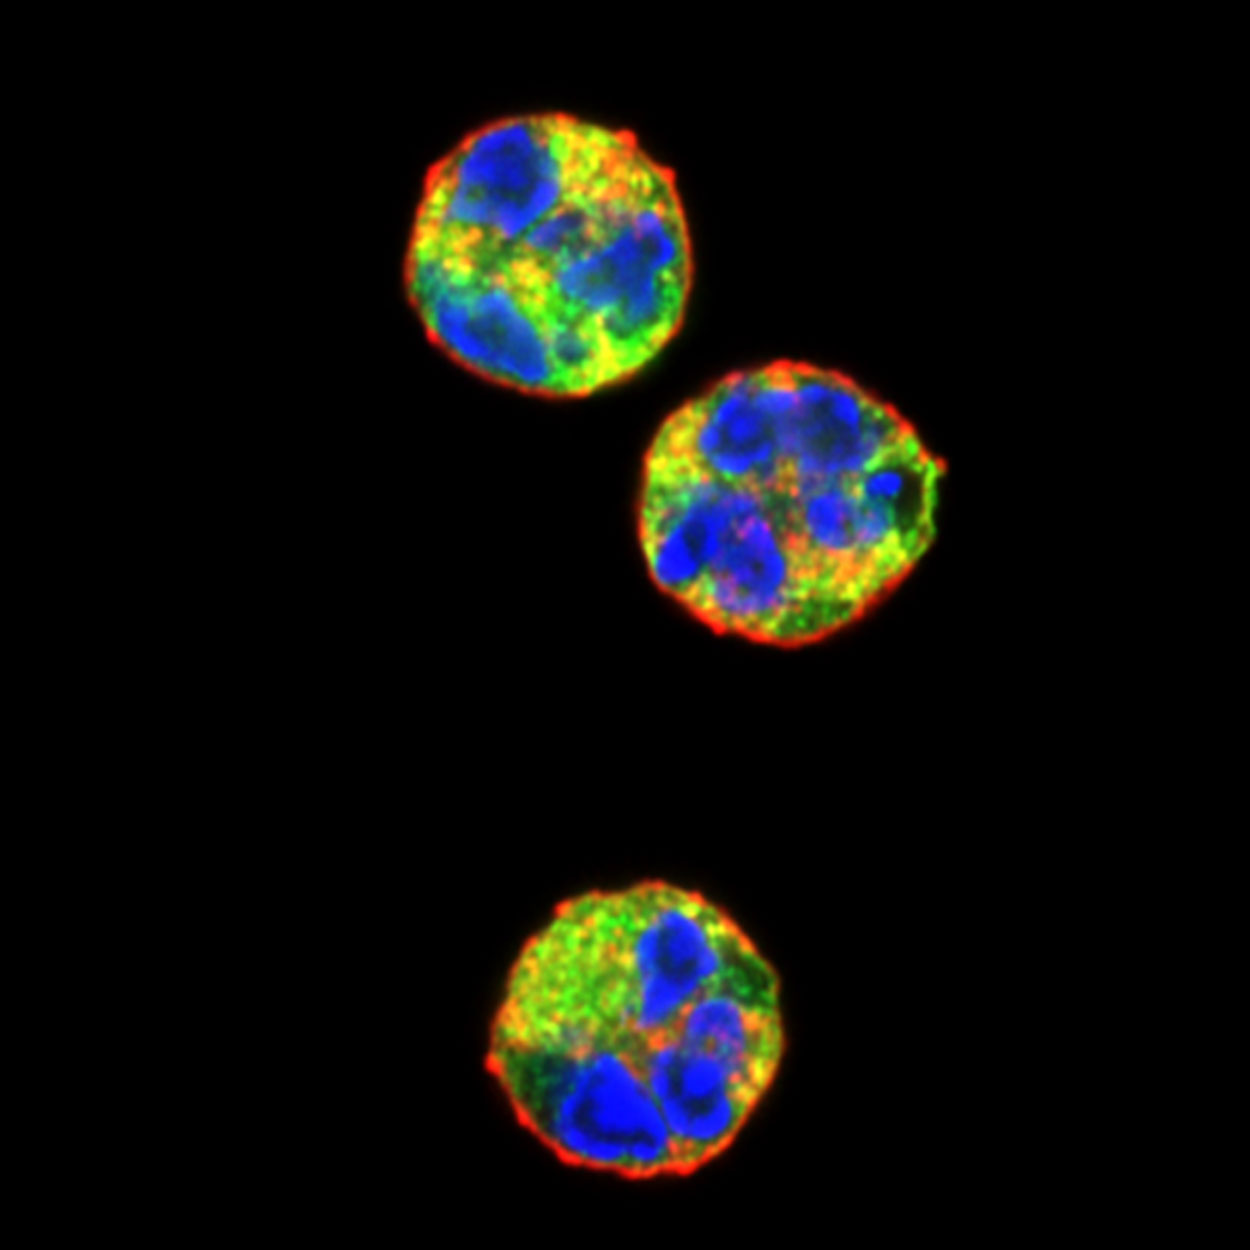 A microscopic image of three cells with green, blue, red, and yellow colors located close to each other.